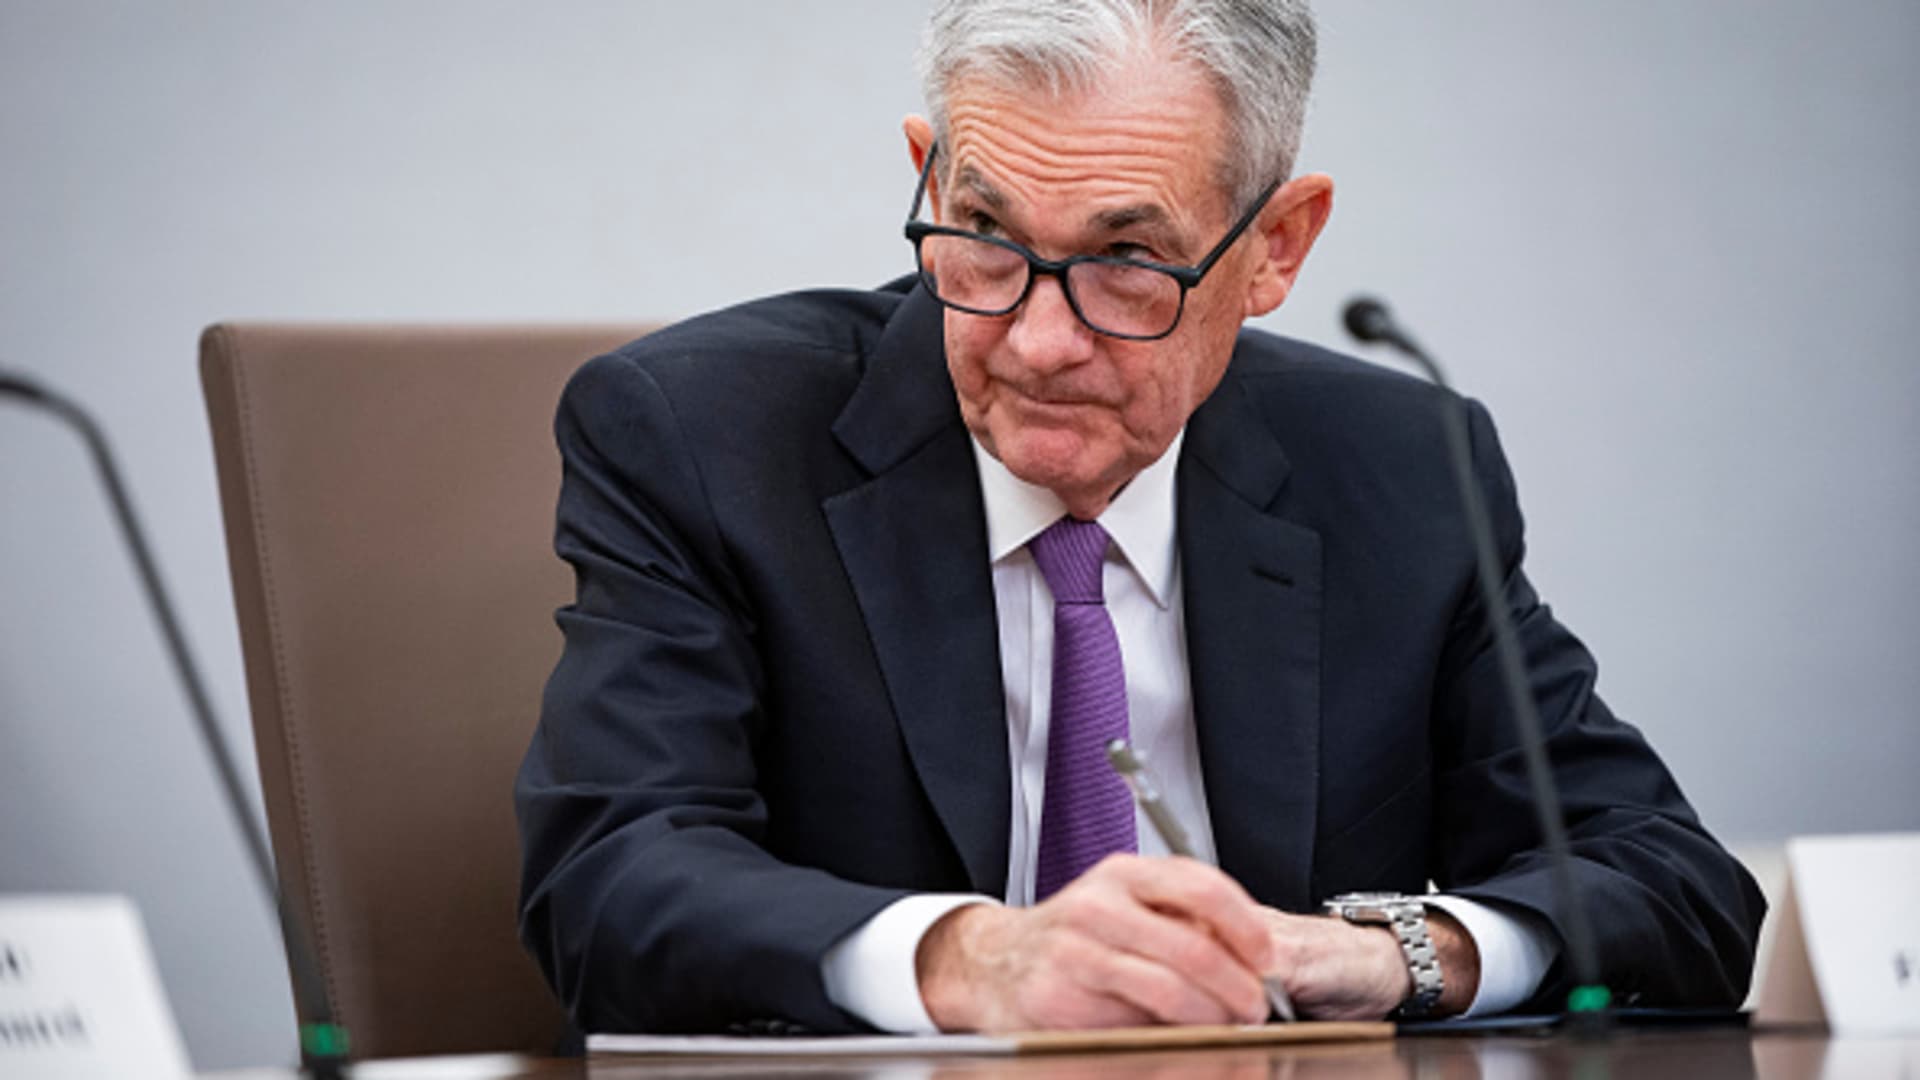 Fed's Powell emphasizes need for more evidence that inflation is easing before cutting rates